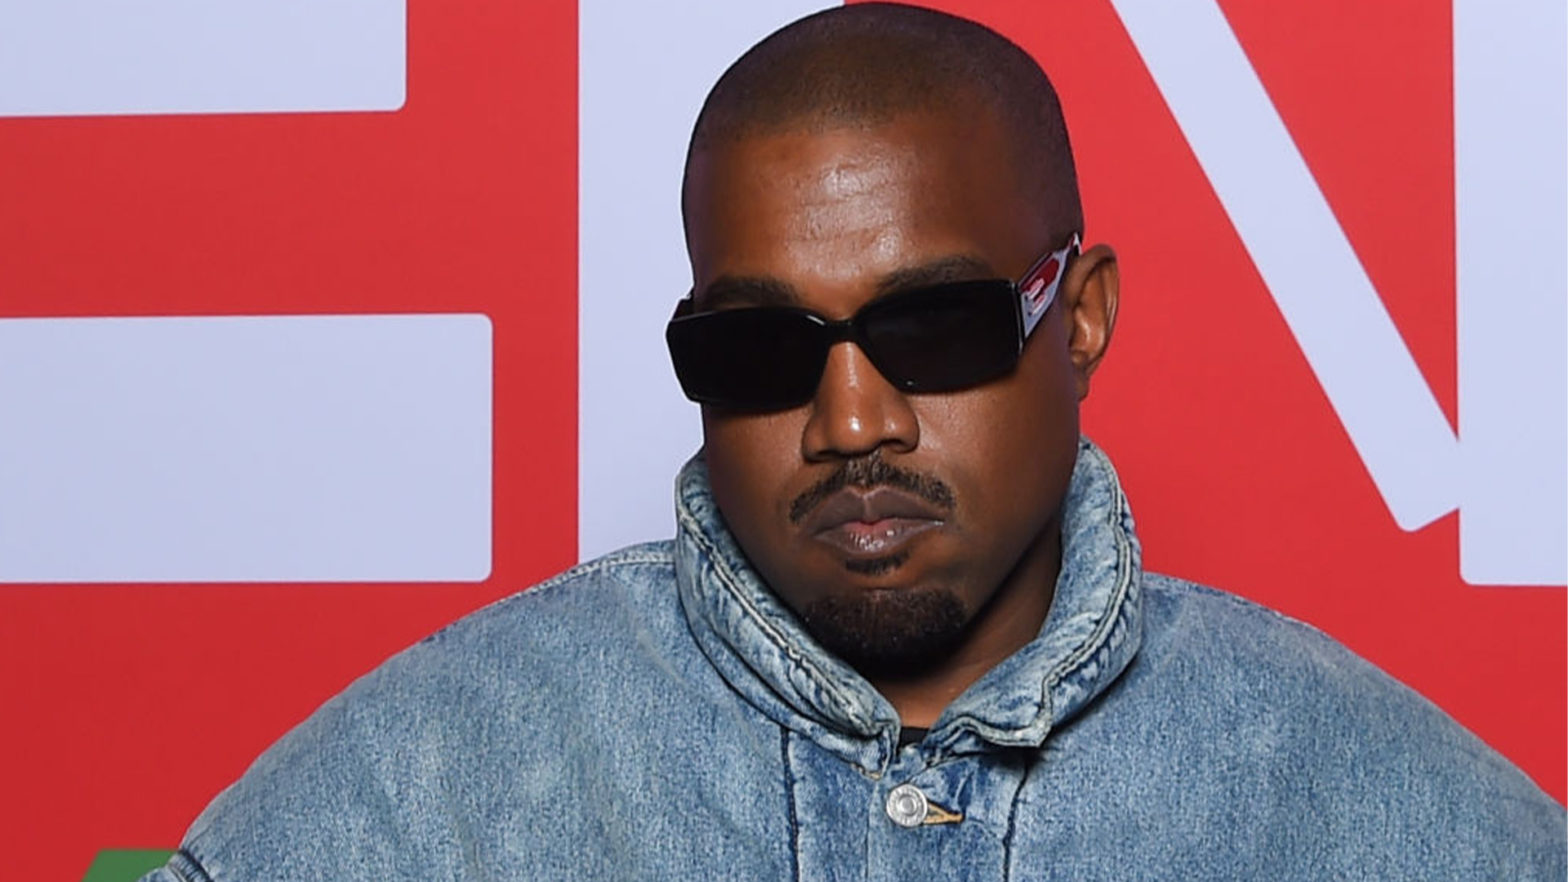 Kanye West Allegedly Once Fired A Yeezy Worker For Asking To Listen To Drake, Report Says